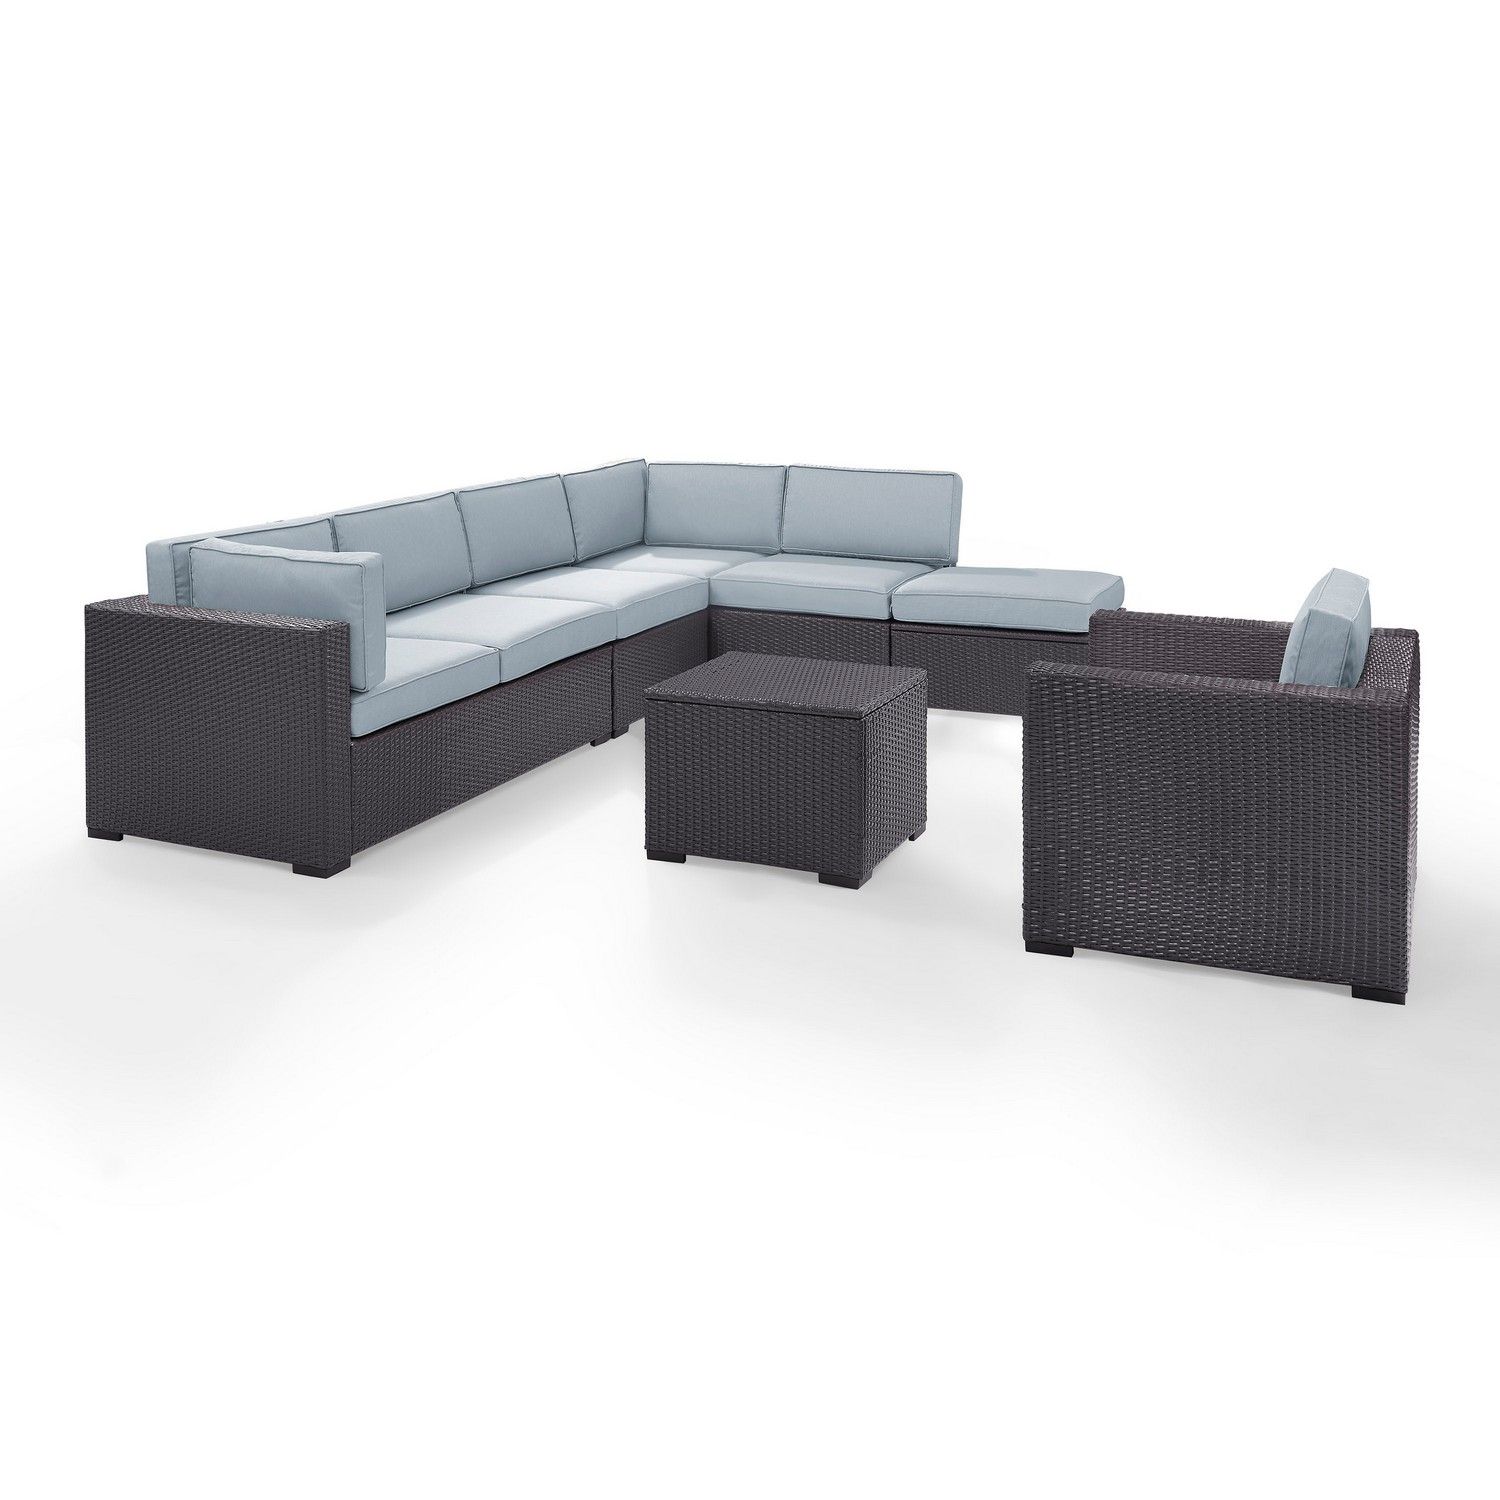 Crosley Biscayne 6-PC Outdoor Wicker Sectional Set - 2 Loveseats, Armless Chair, Arm Chair, Coffee Table, Ottoman - Mist/Brown